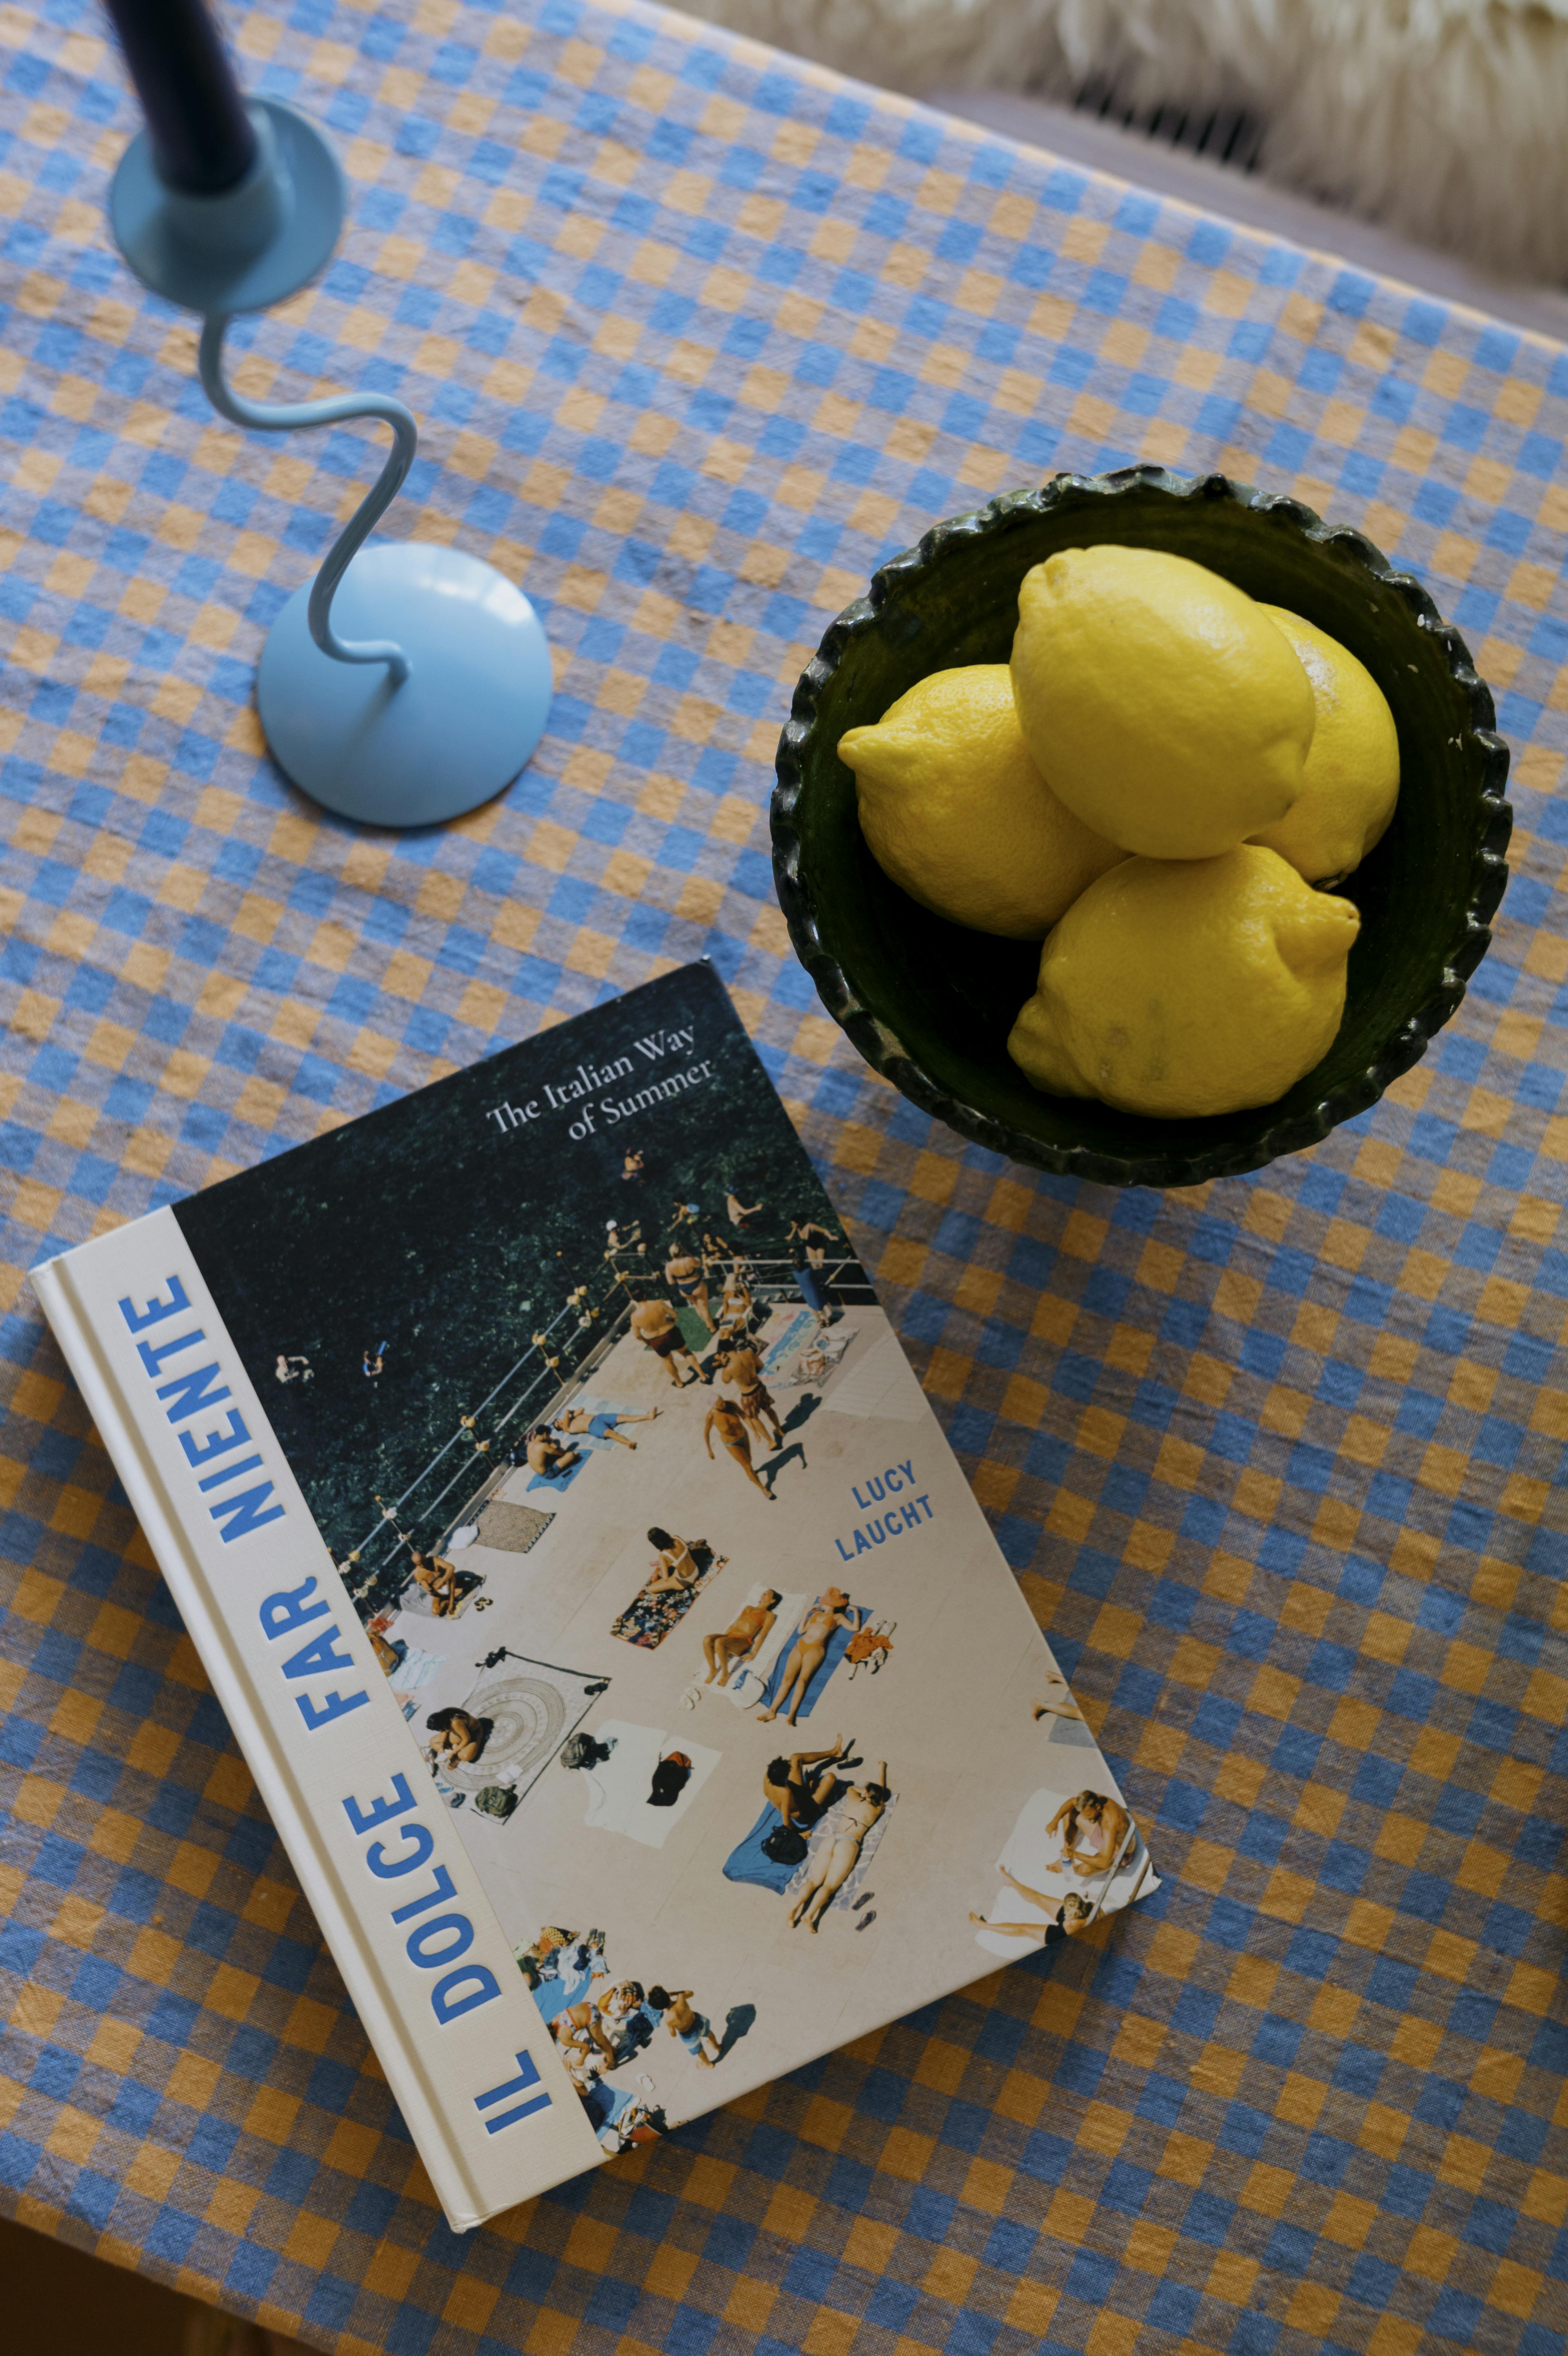 Il Dolce Far Niente Book with a bowl of lemons and blue candlestick on a blue and peach checked tablecloth